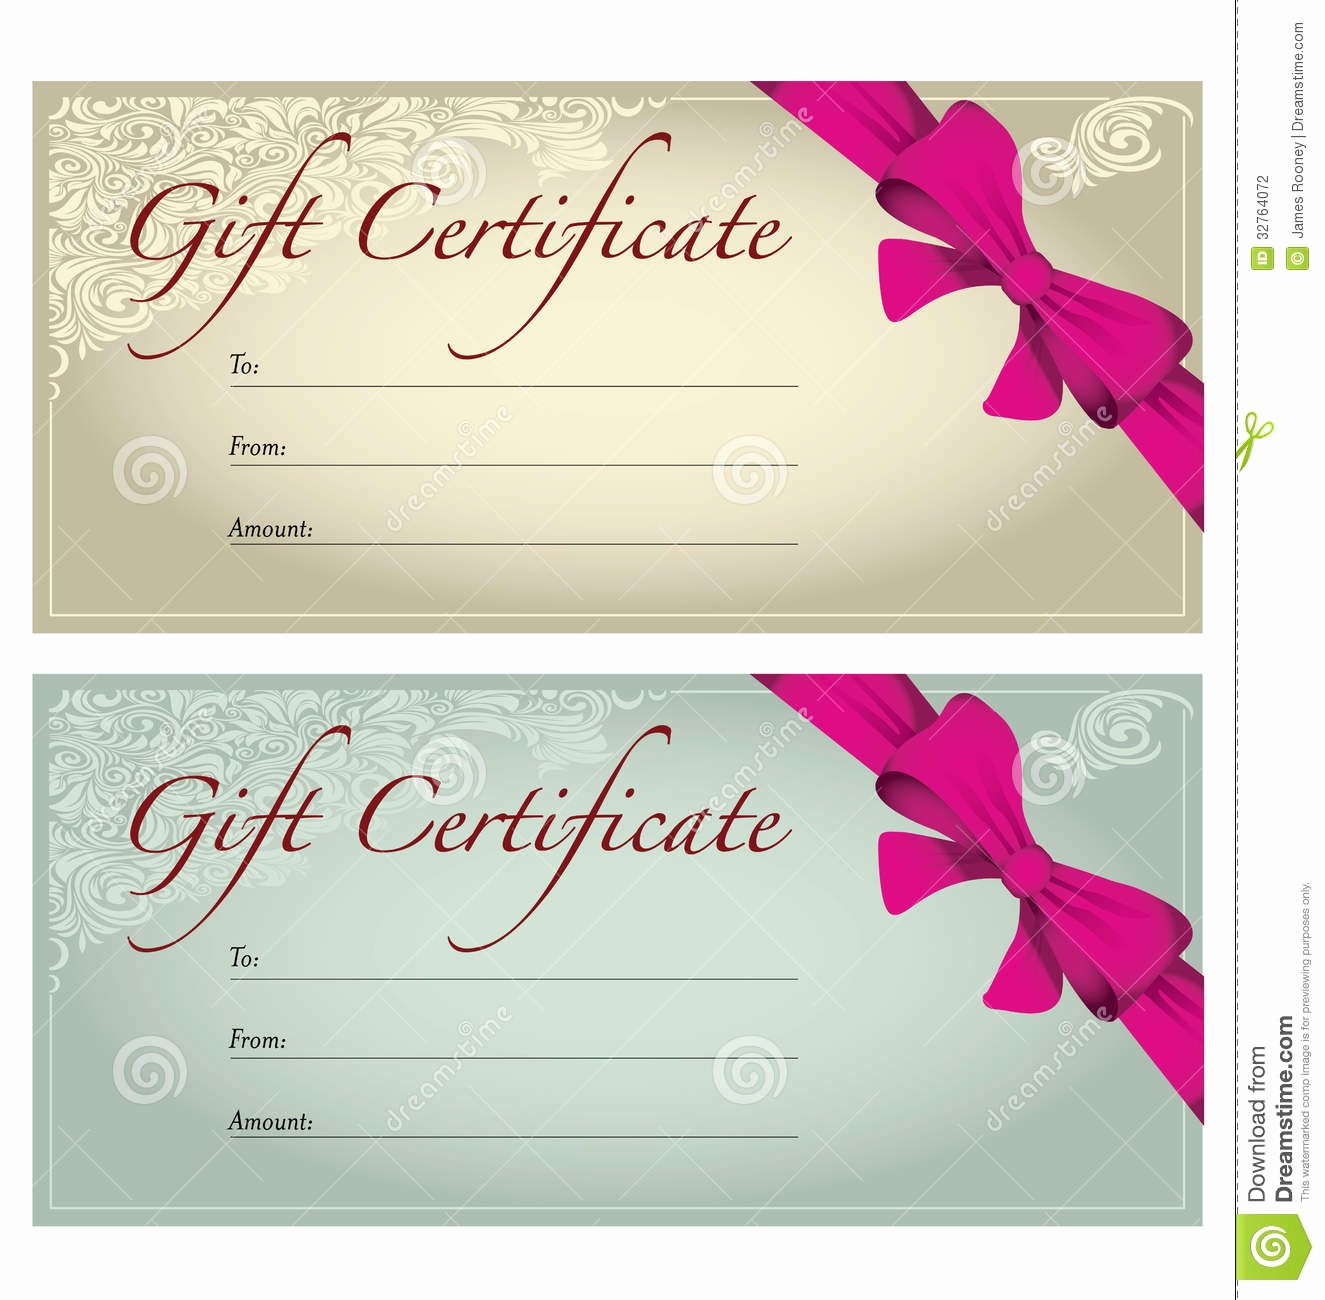 Printable Gift Coupon Templates Free Luxury Gift Certificate Template